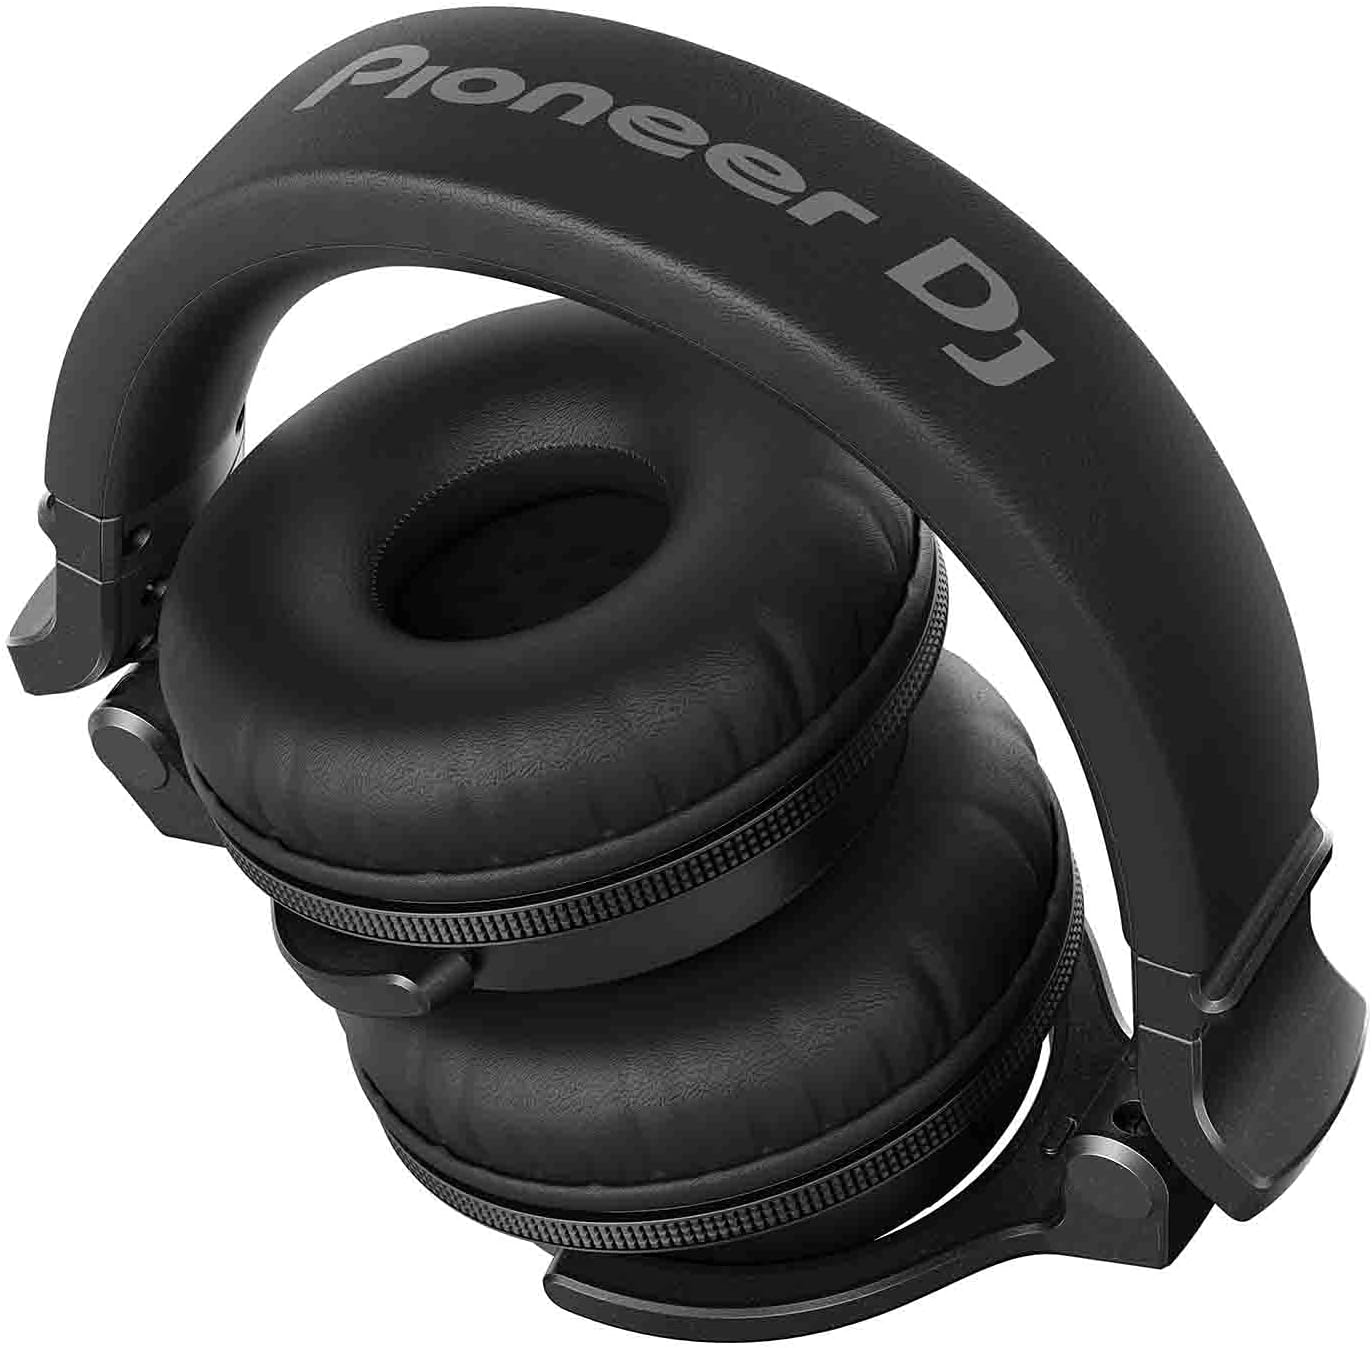 Ideal Headphones for Wired DJ Capability, (Black)